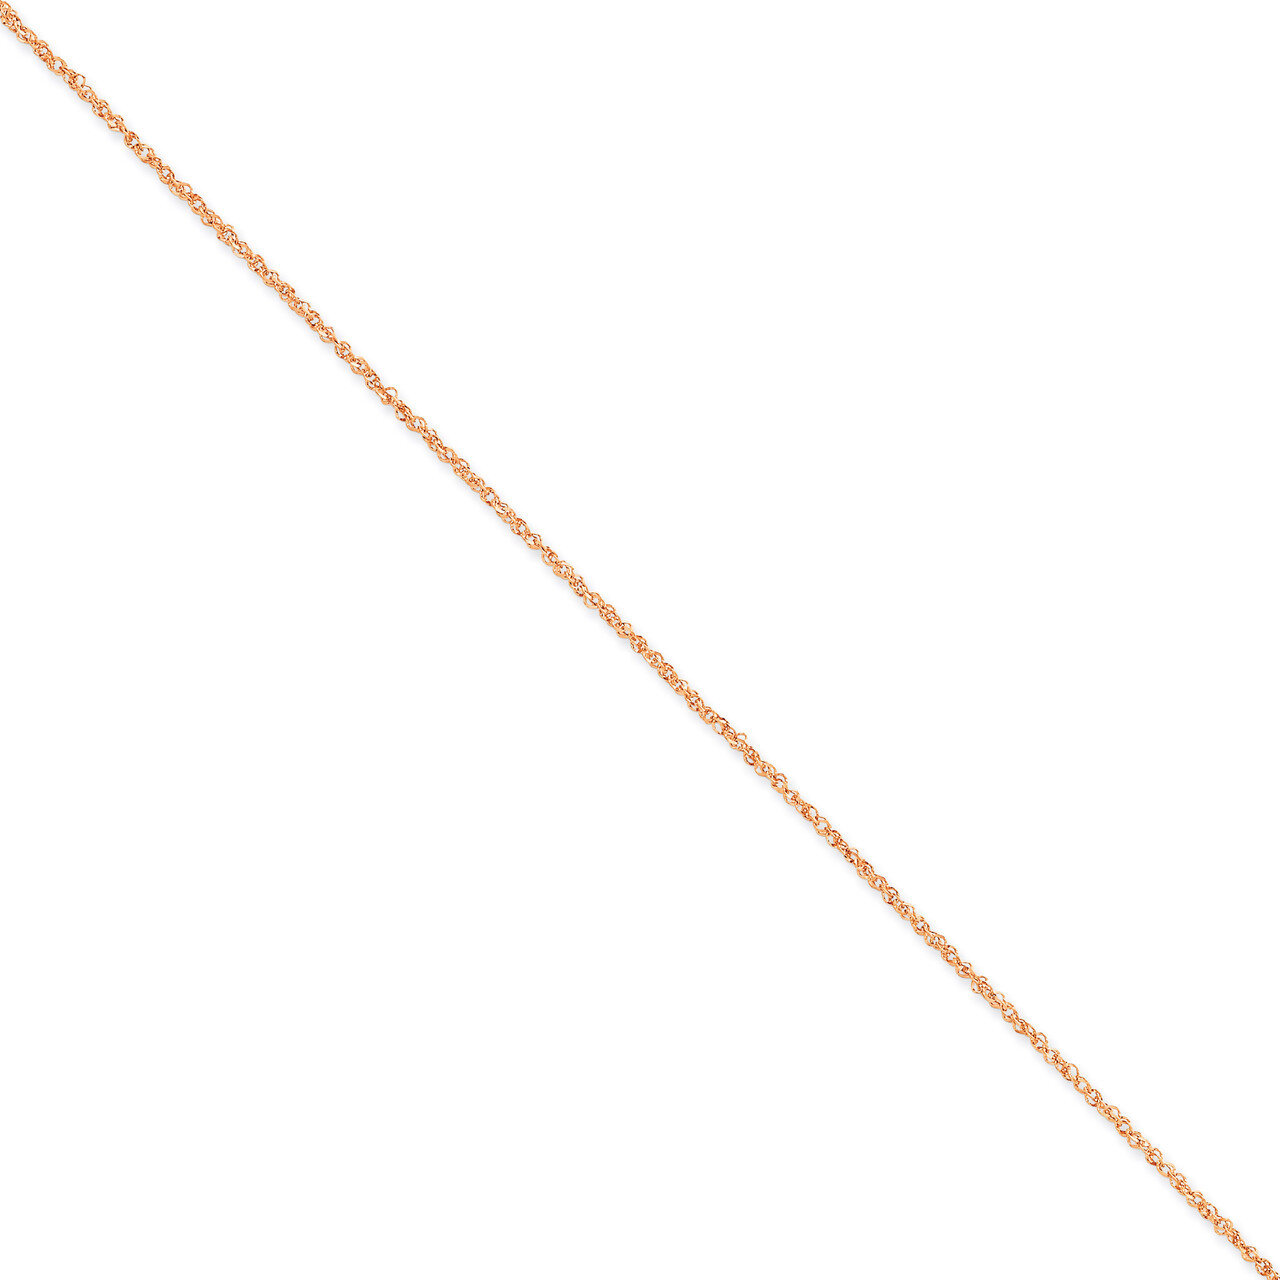 1.7mm Ropa Chain 16 Inch 14k Rose Gold RSC28-16